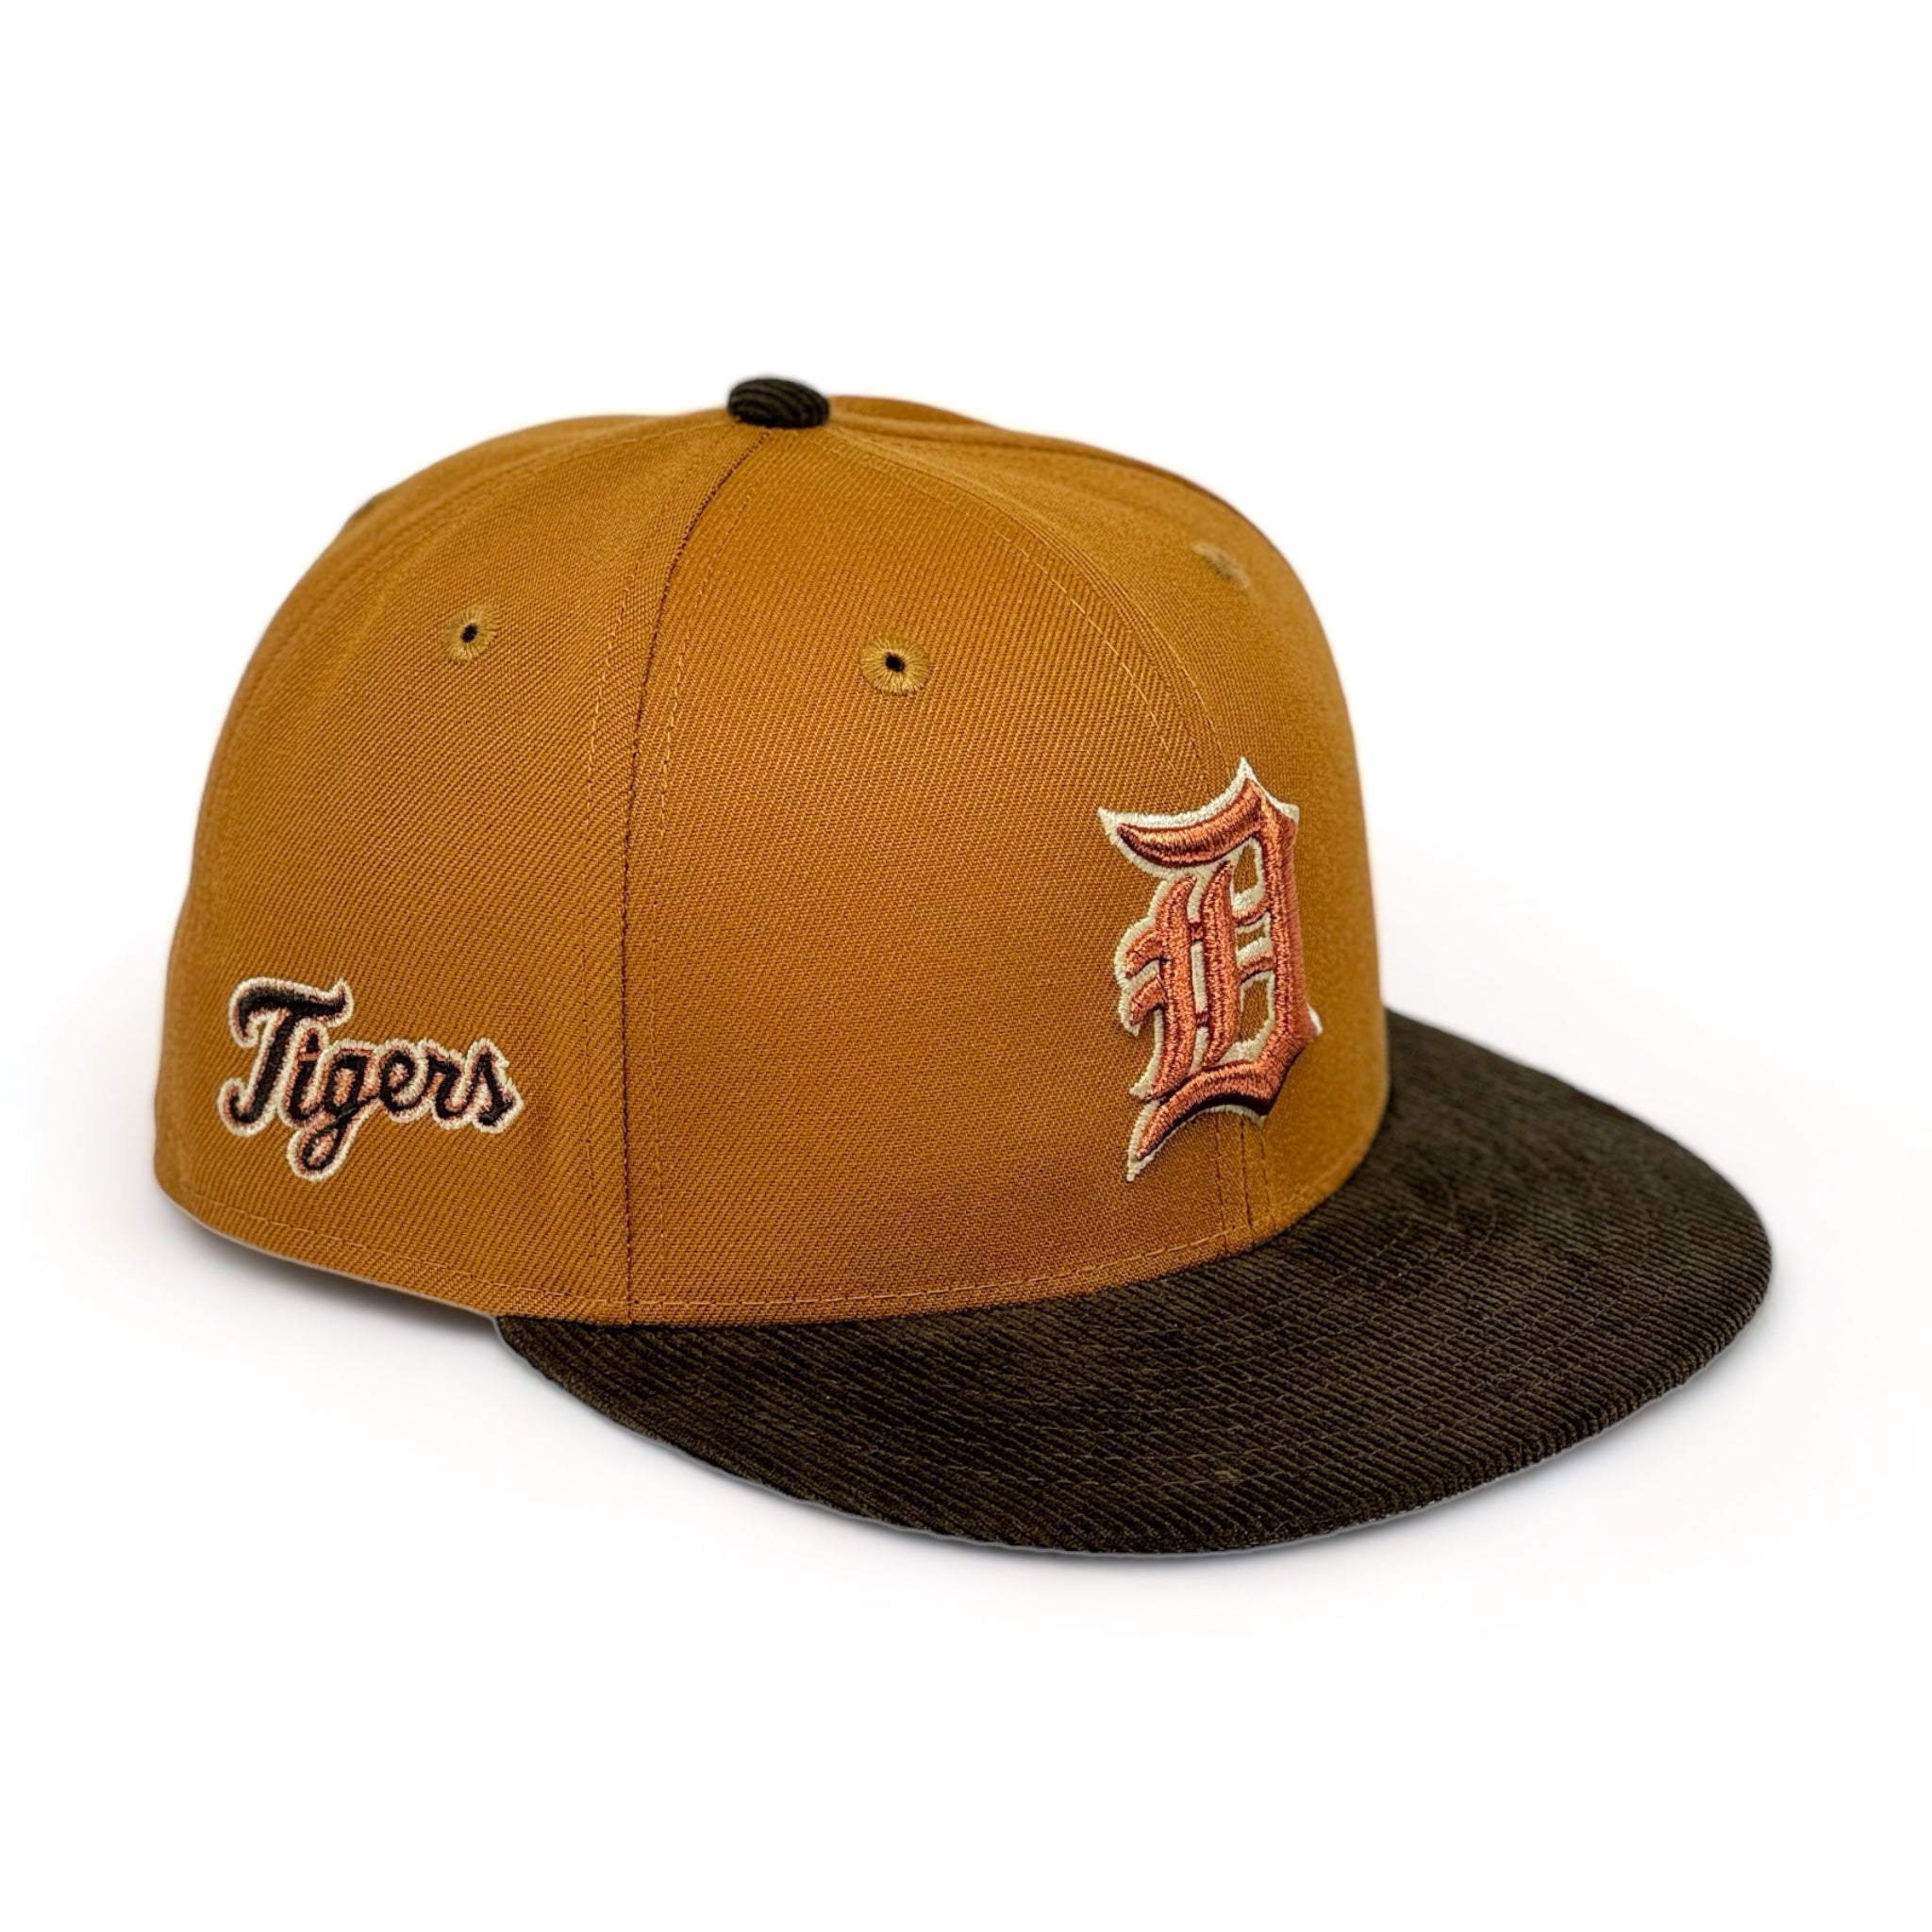 DETROIT TIGERS (BRONZE) SIDE SCRIPT NEW ERA 59FIFTY FITTED